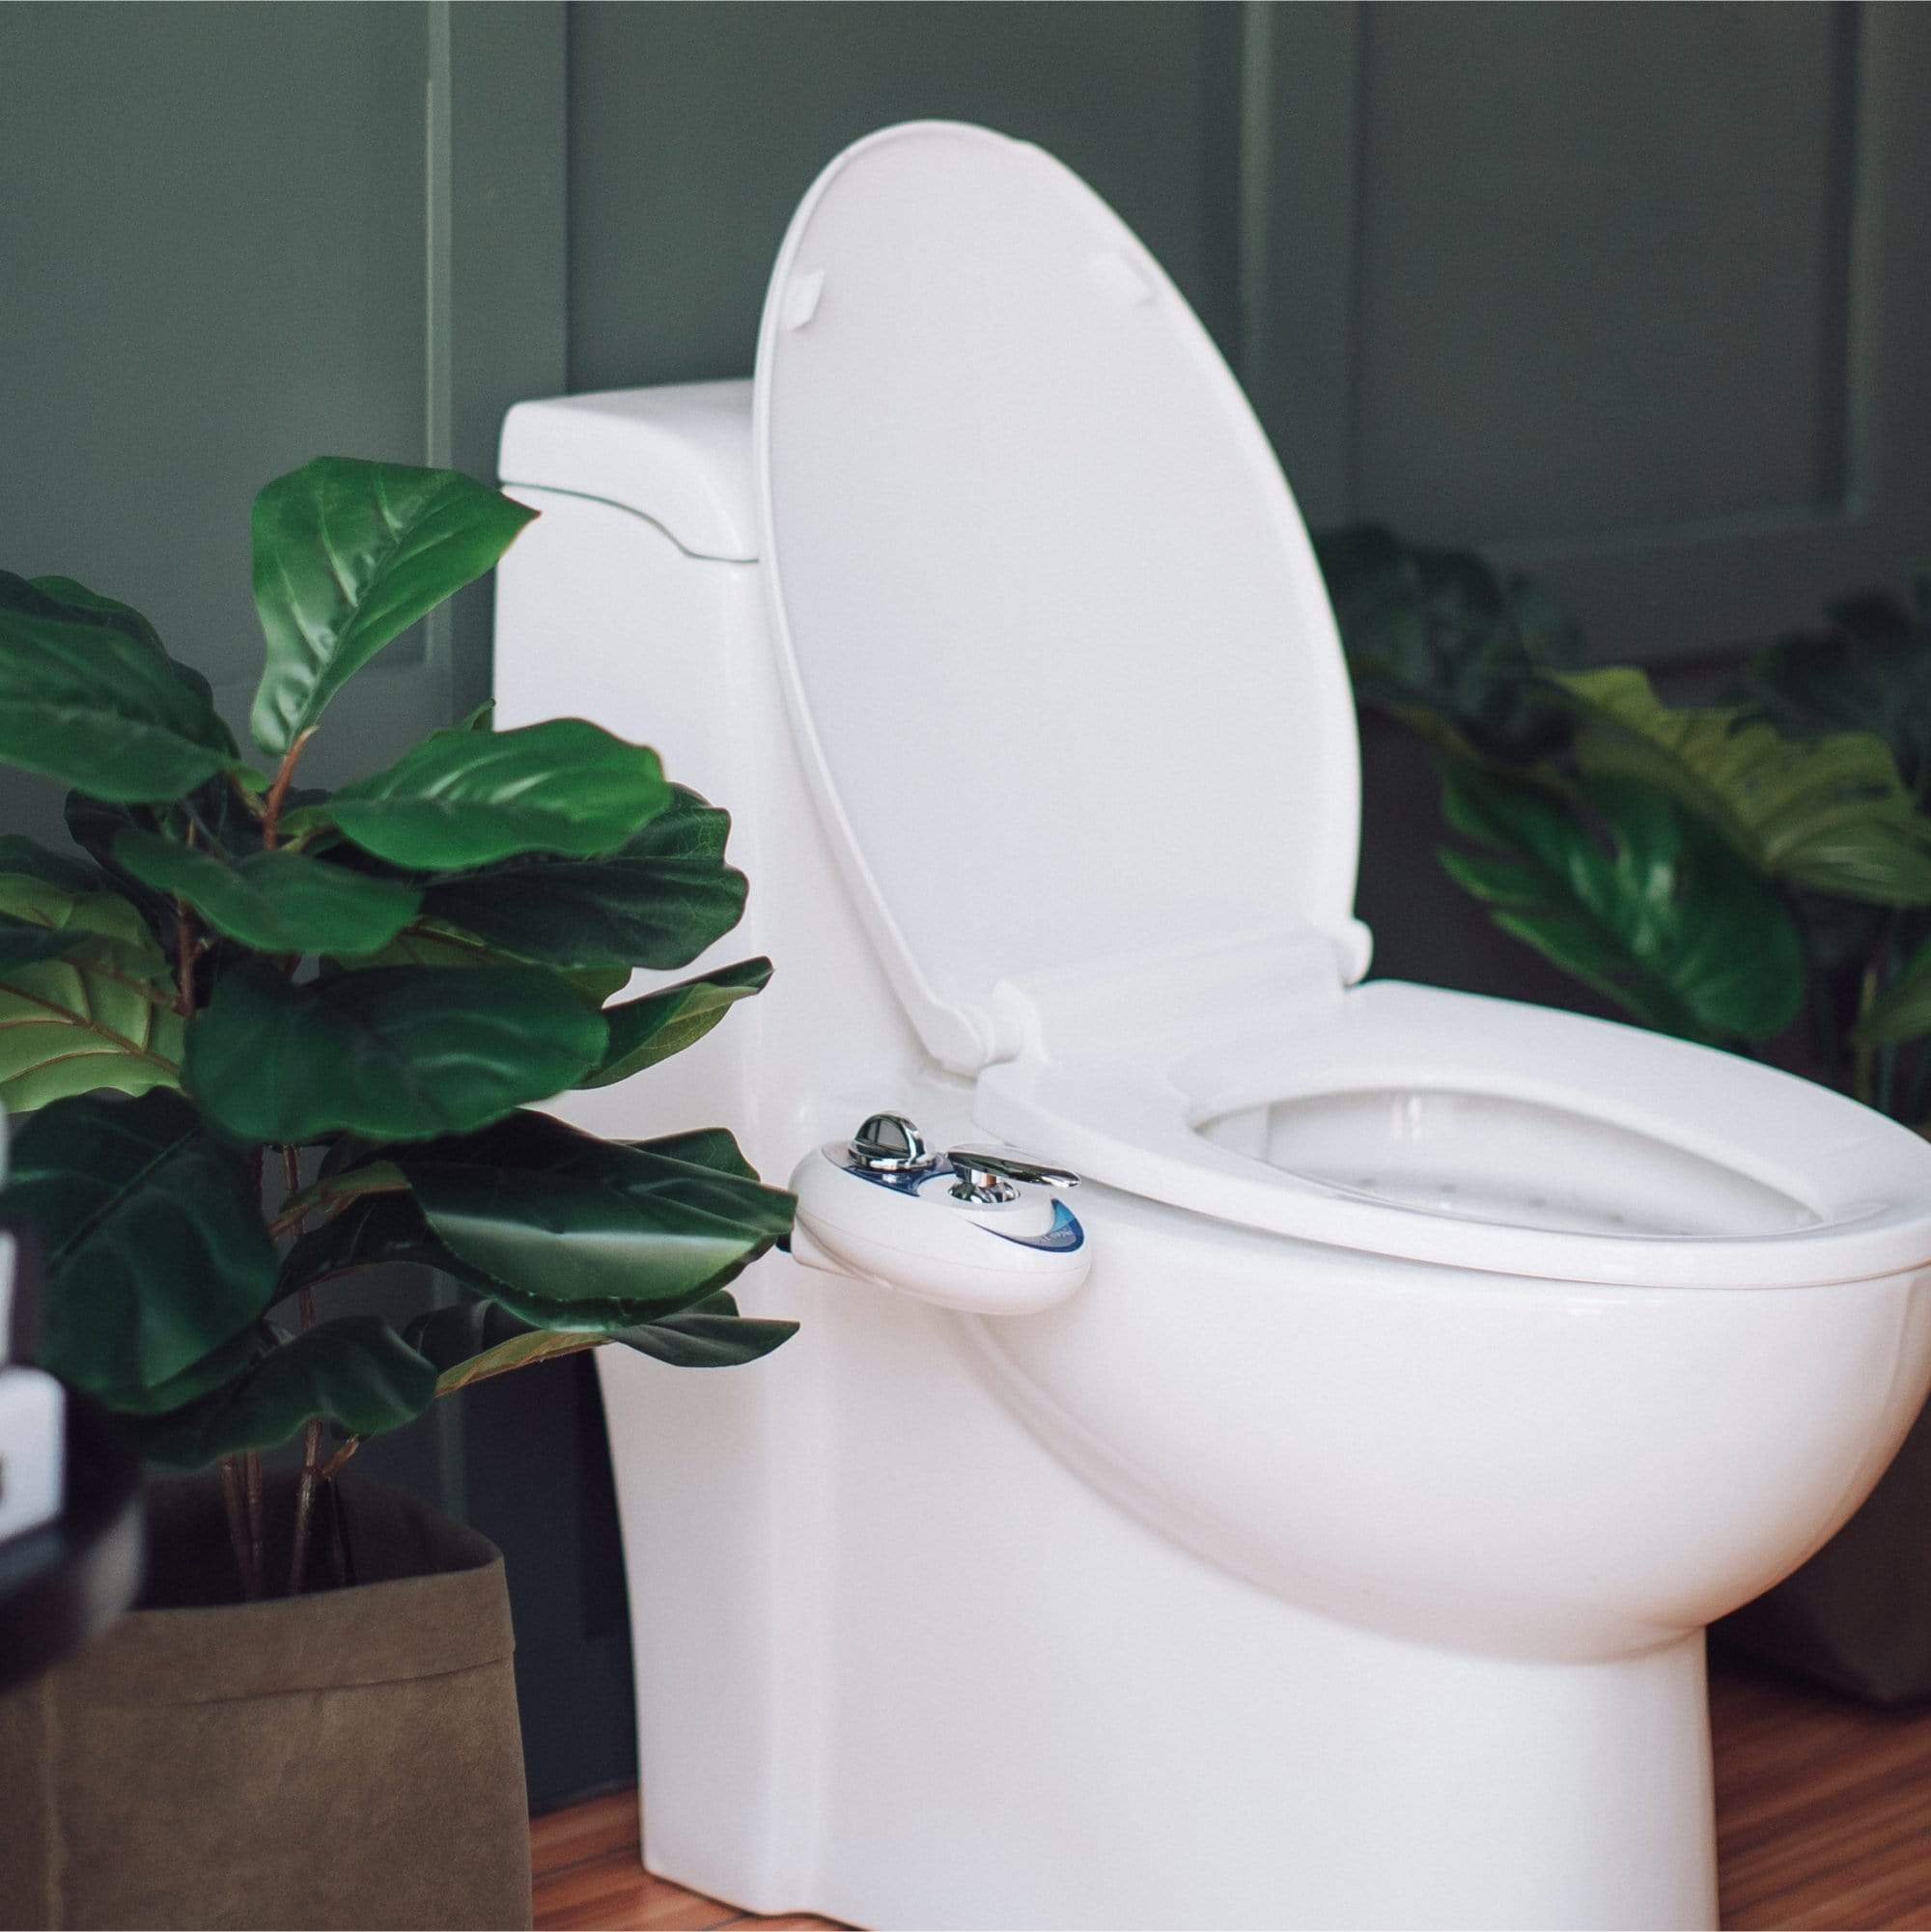 NEO 180 White installed on a toilet, in a modern bathroom with plants